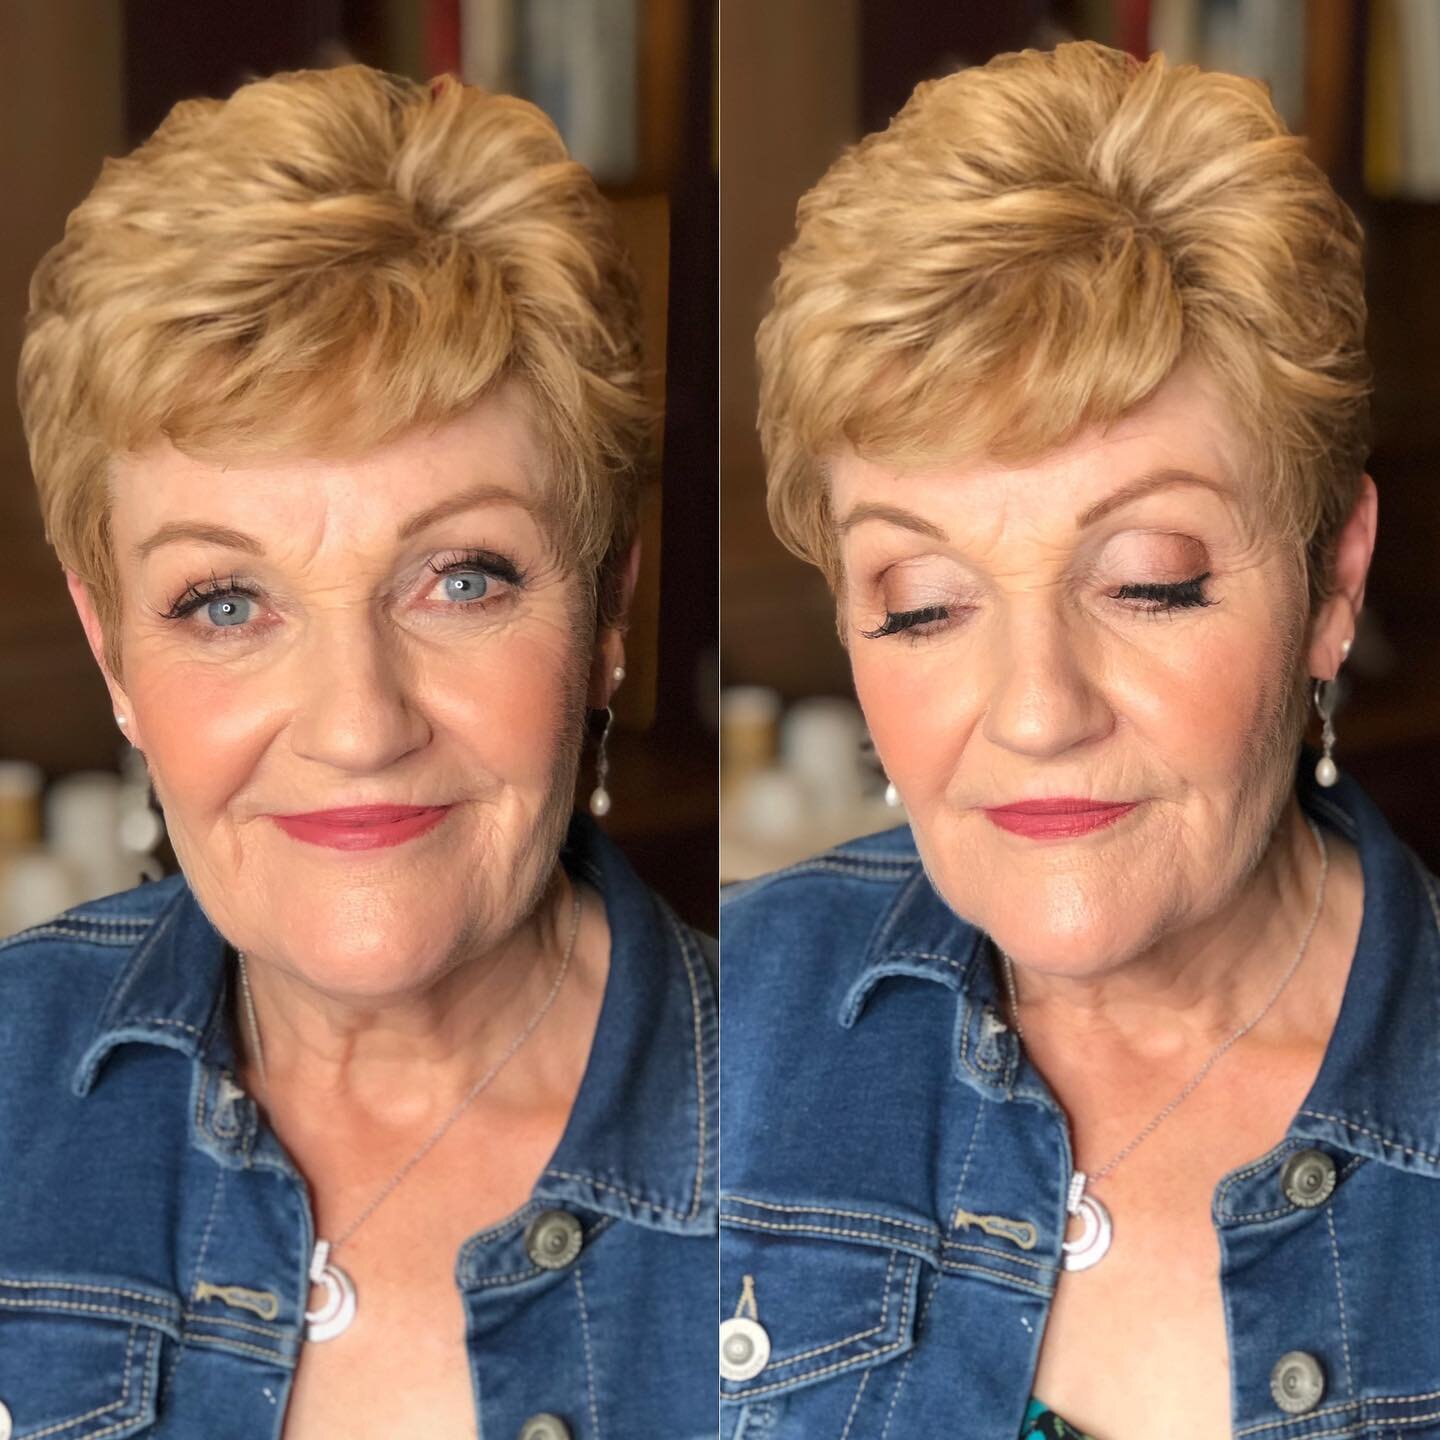 Stunning Grandma of the bride.
This is the makeup look you get when you actually allow the professional to do her job!
Absolutely glowing. 
.
.
makeup by @daniellegradmakeup of Pretty Me.
.
#beauty #beautiful #makeup #makeupartist #makeuplooks #weddi